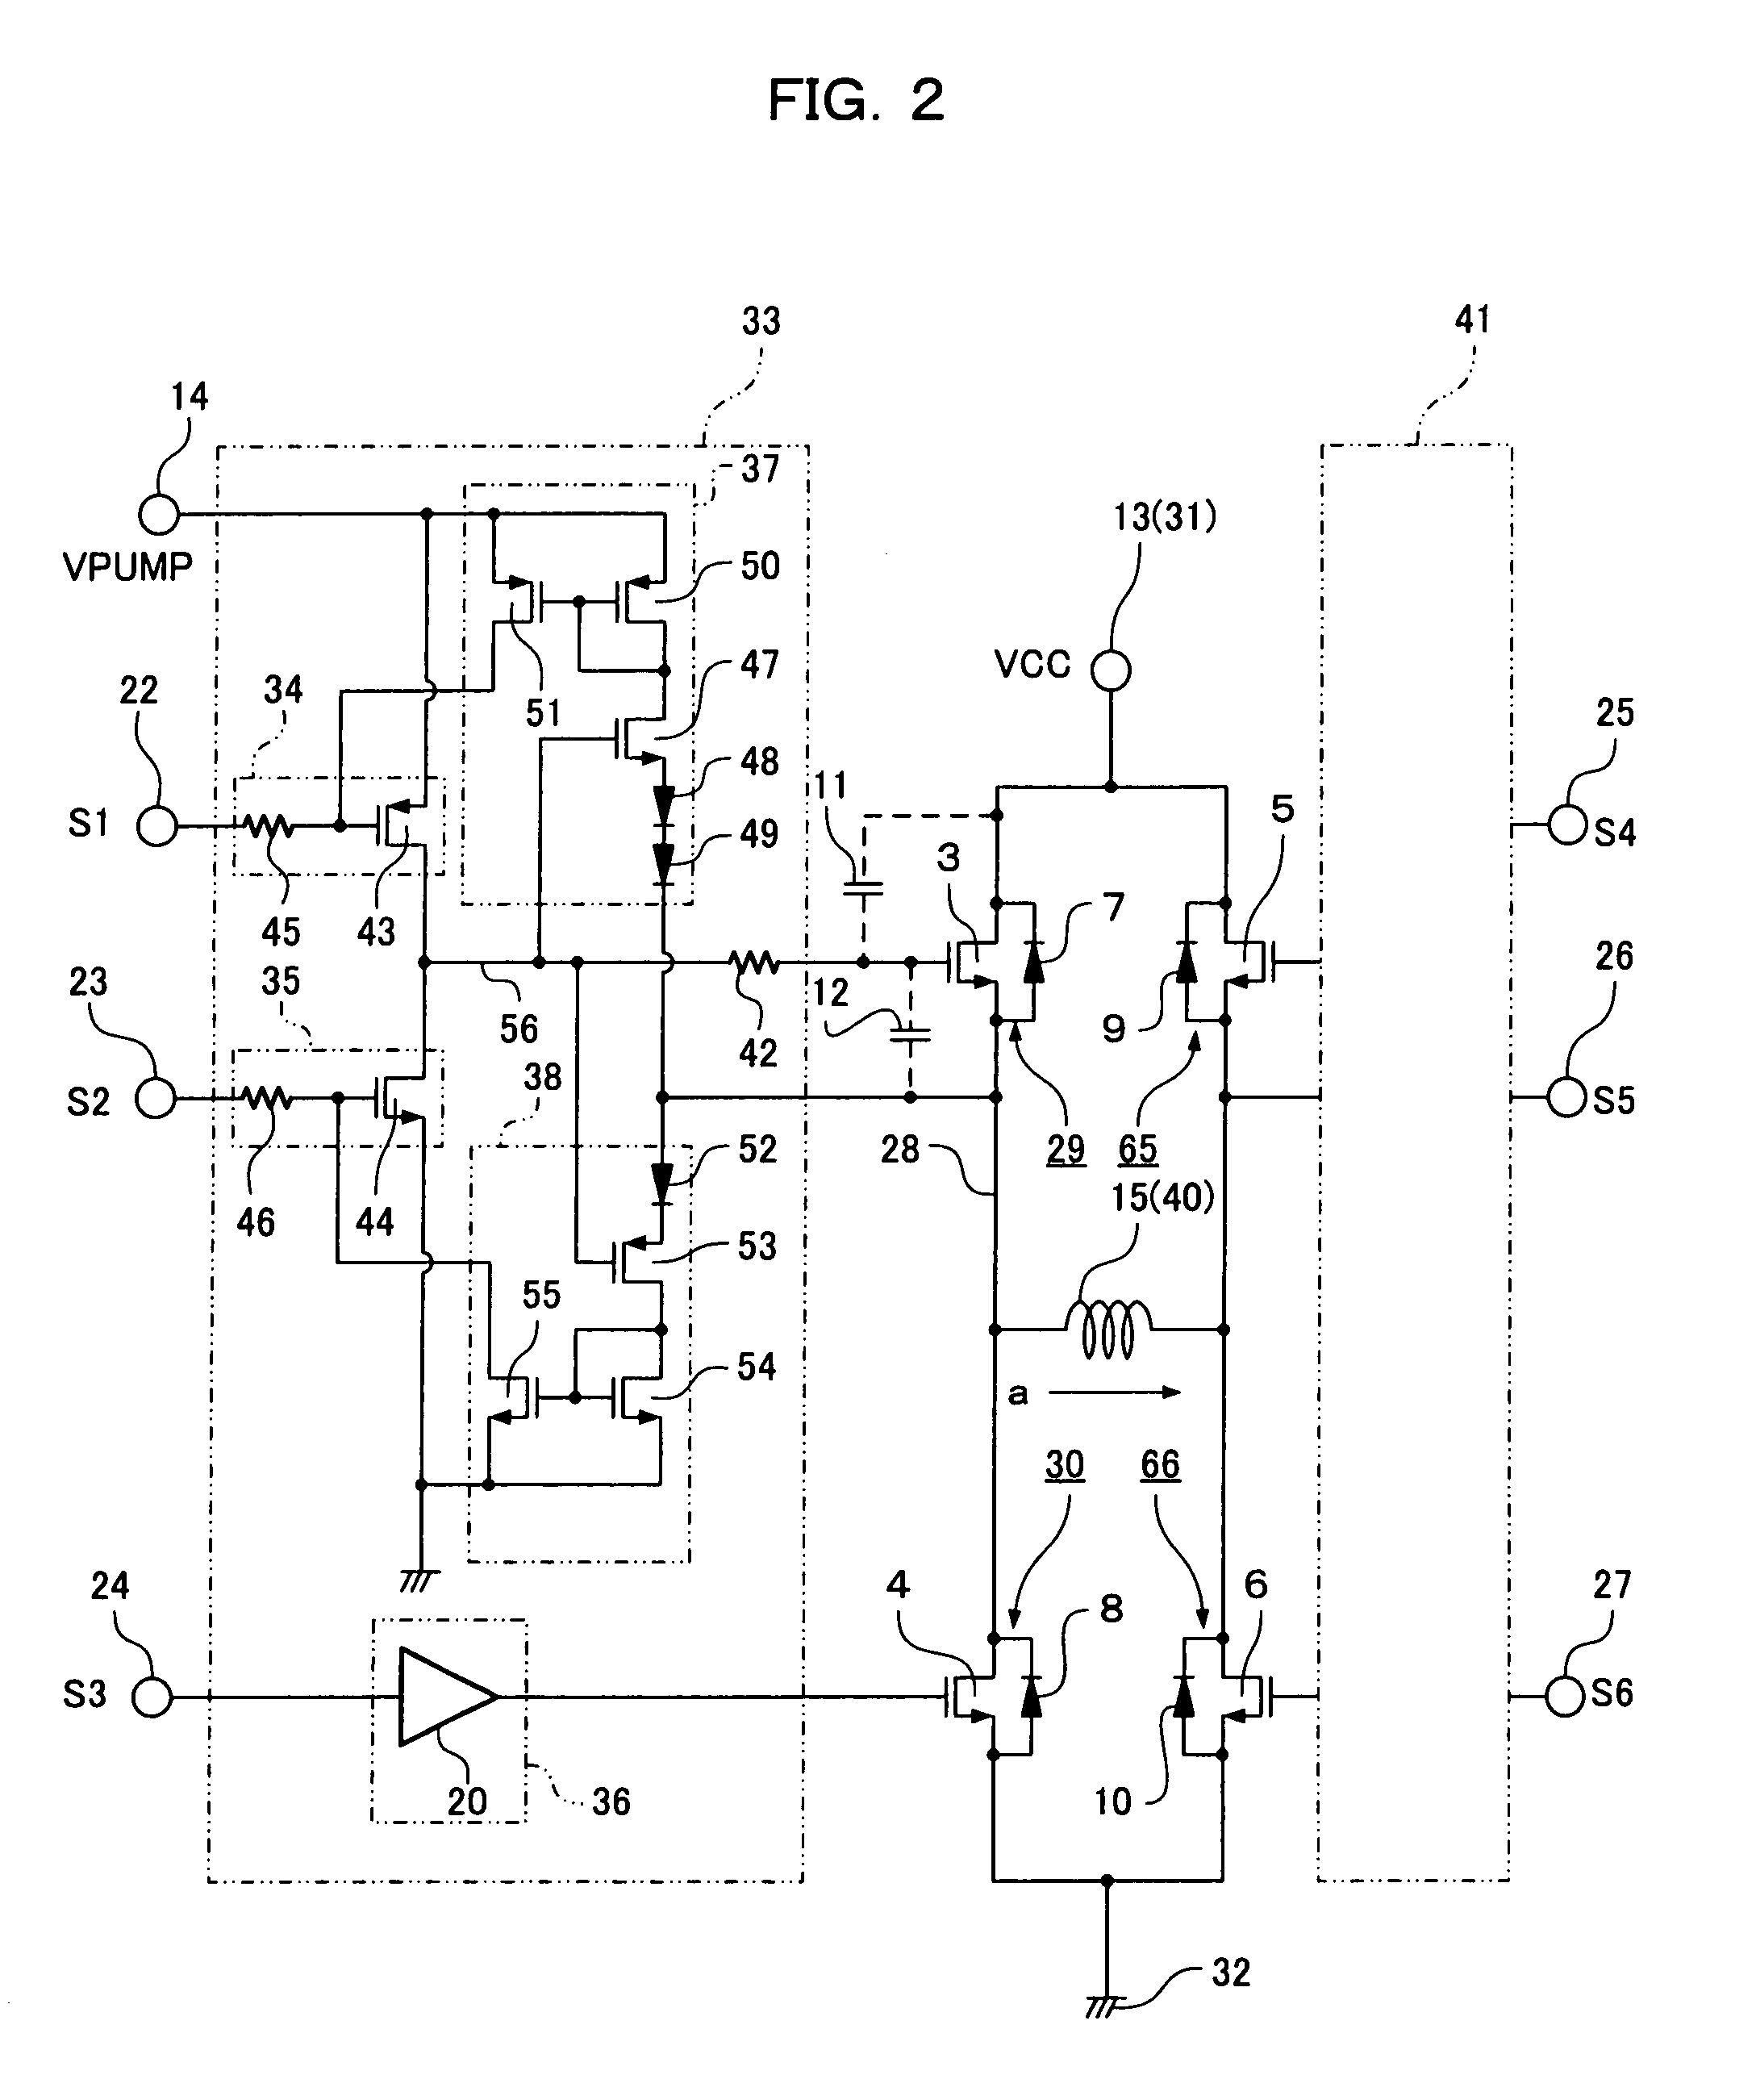 Switching control system and motor driving system